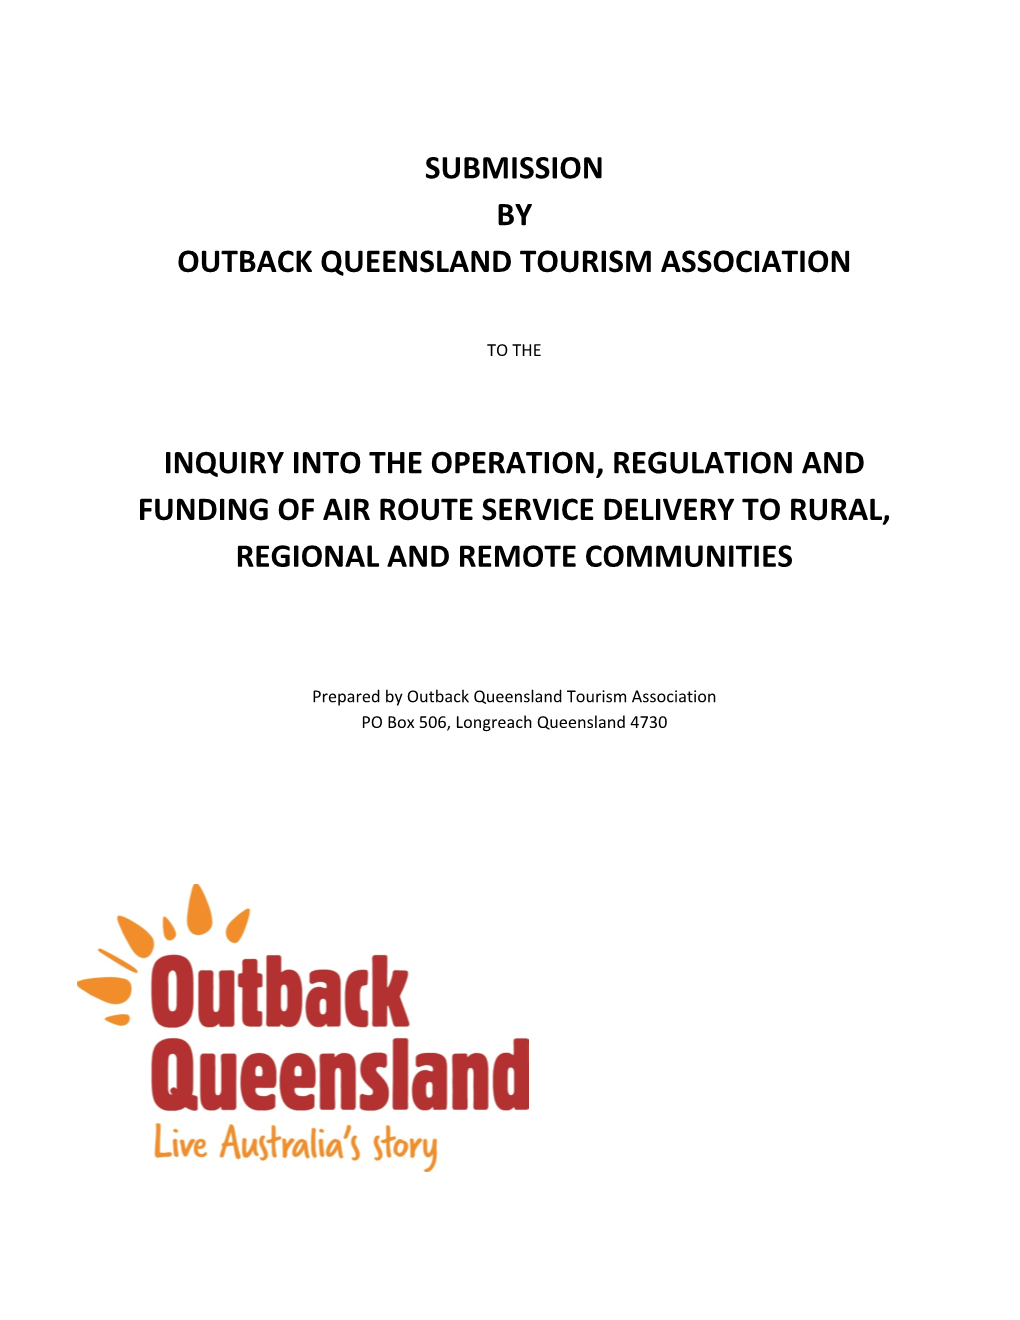 Submission by Outback Queensland Tourism Association